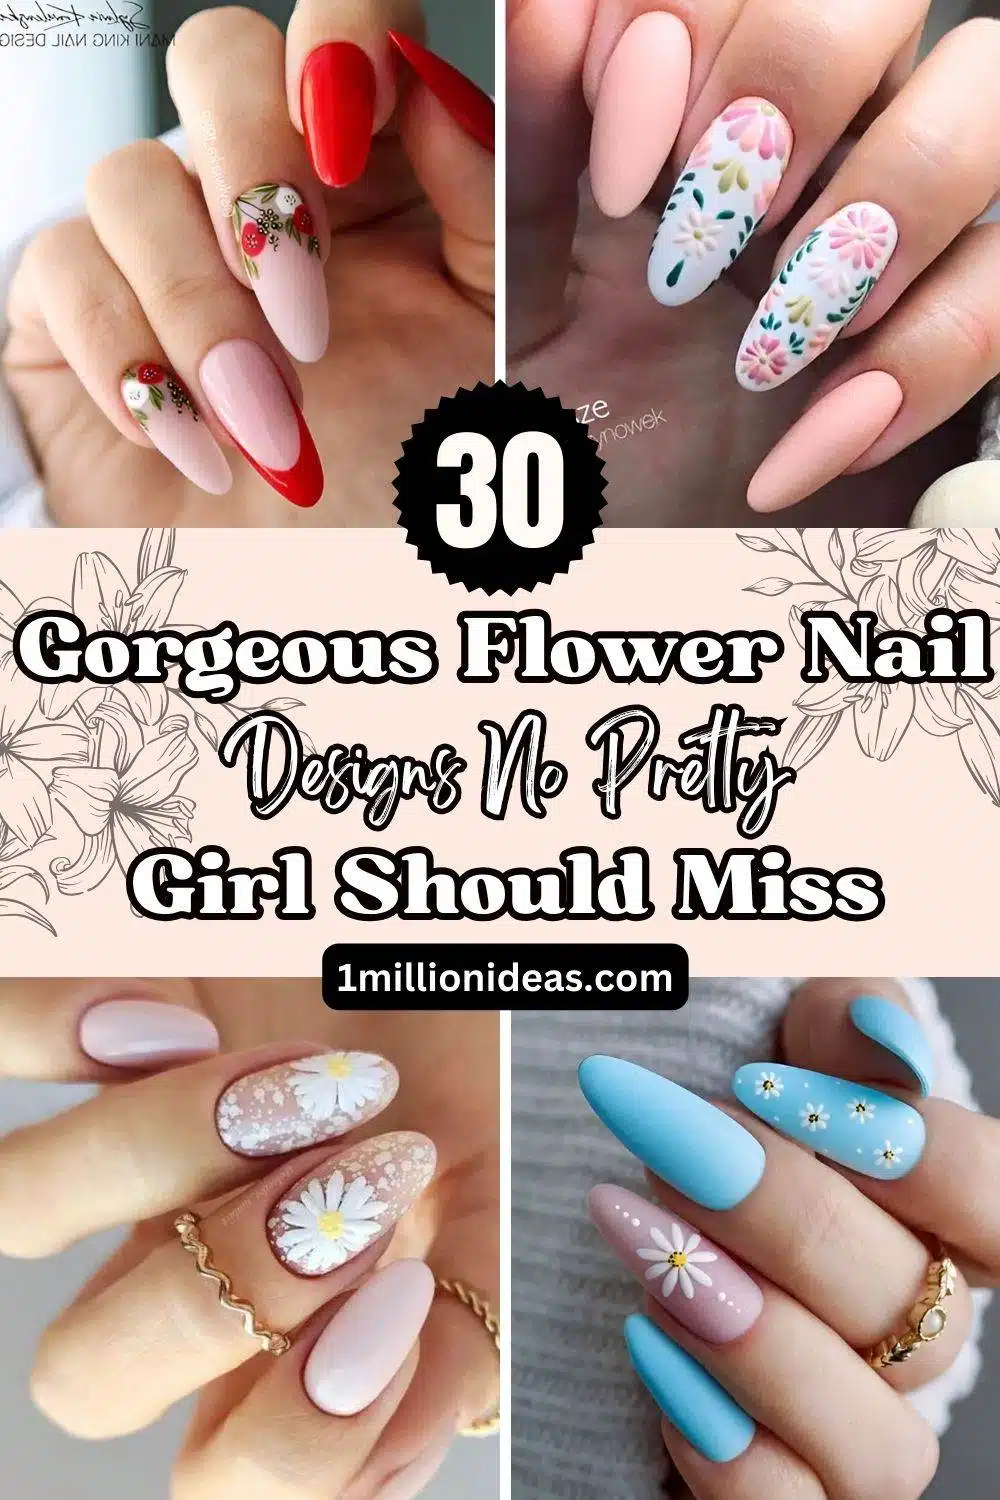 30 Gorgeous Flower Nail Designs No Pretty Girl Should Miss - 191